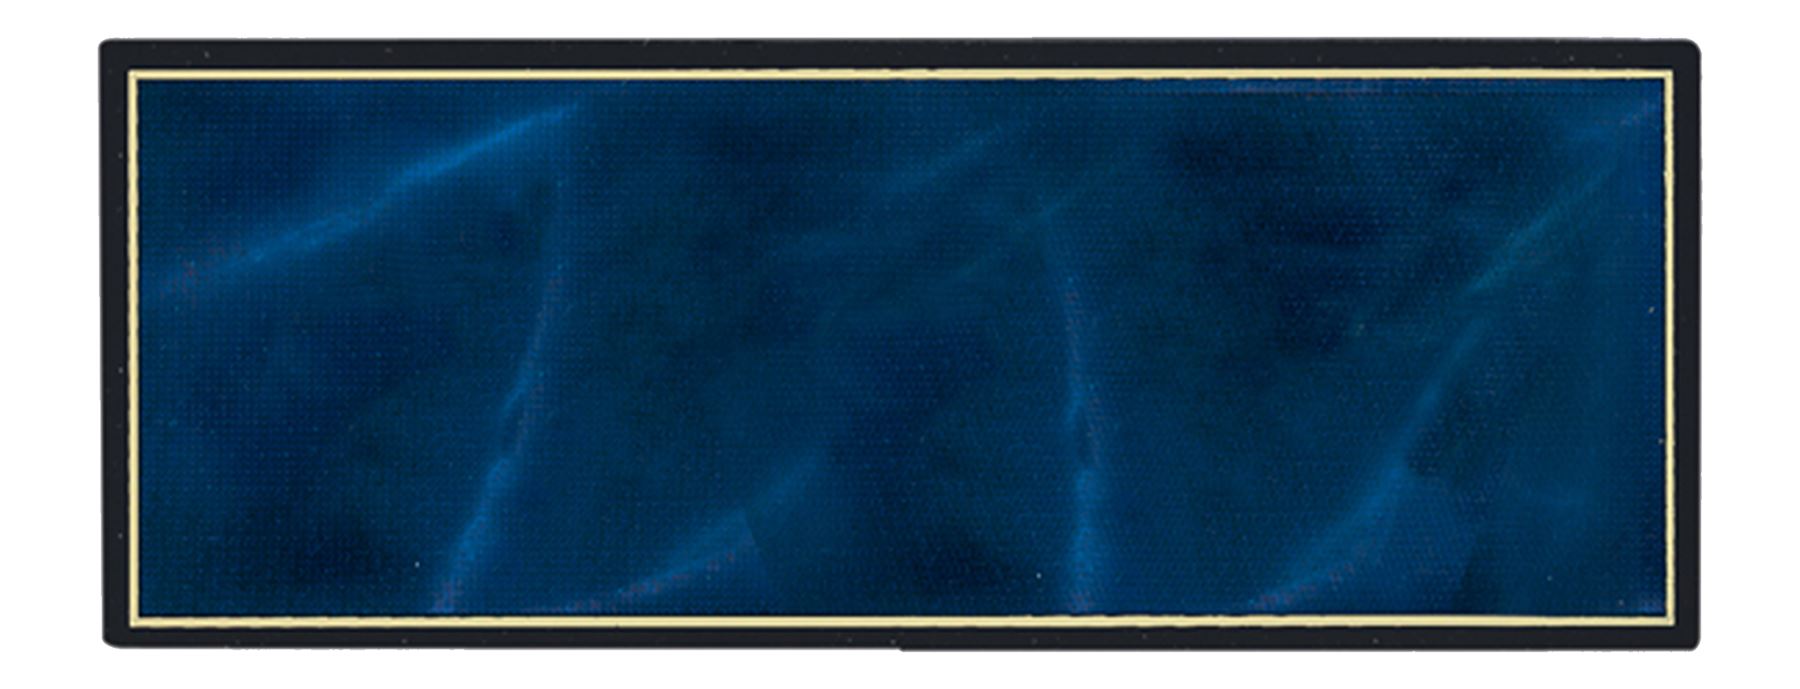 Blue Marble Recognition Pocket Perpetual Plate 6 1/2" x 2 1/2" Perpetual Plates Craftworks NW 